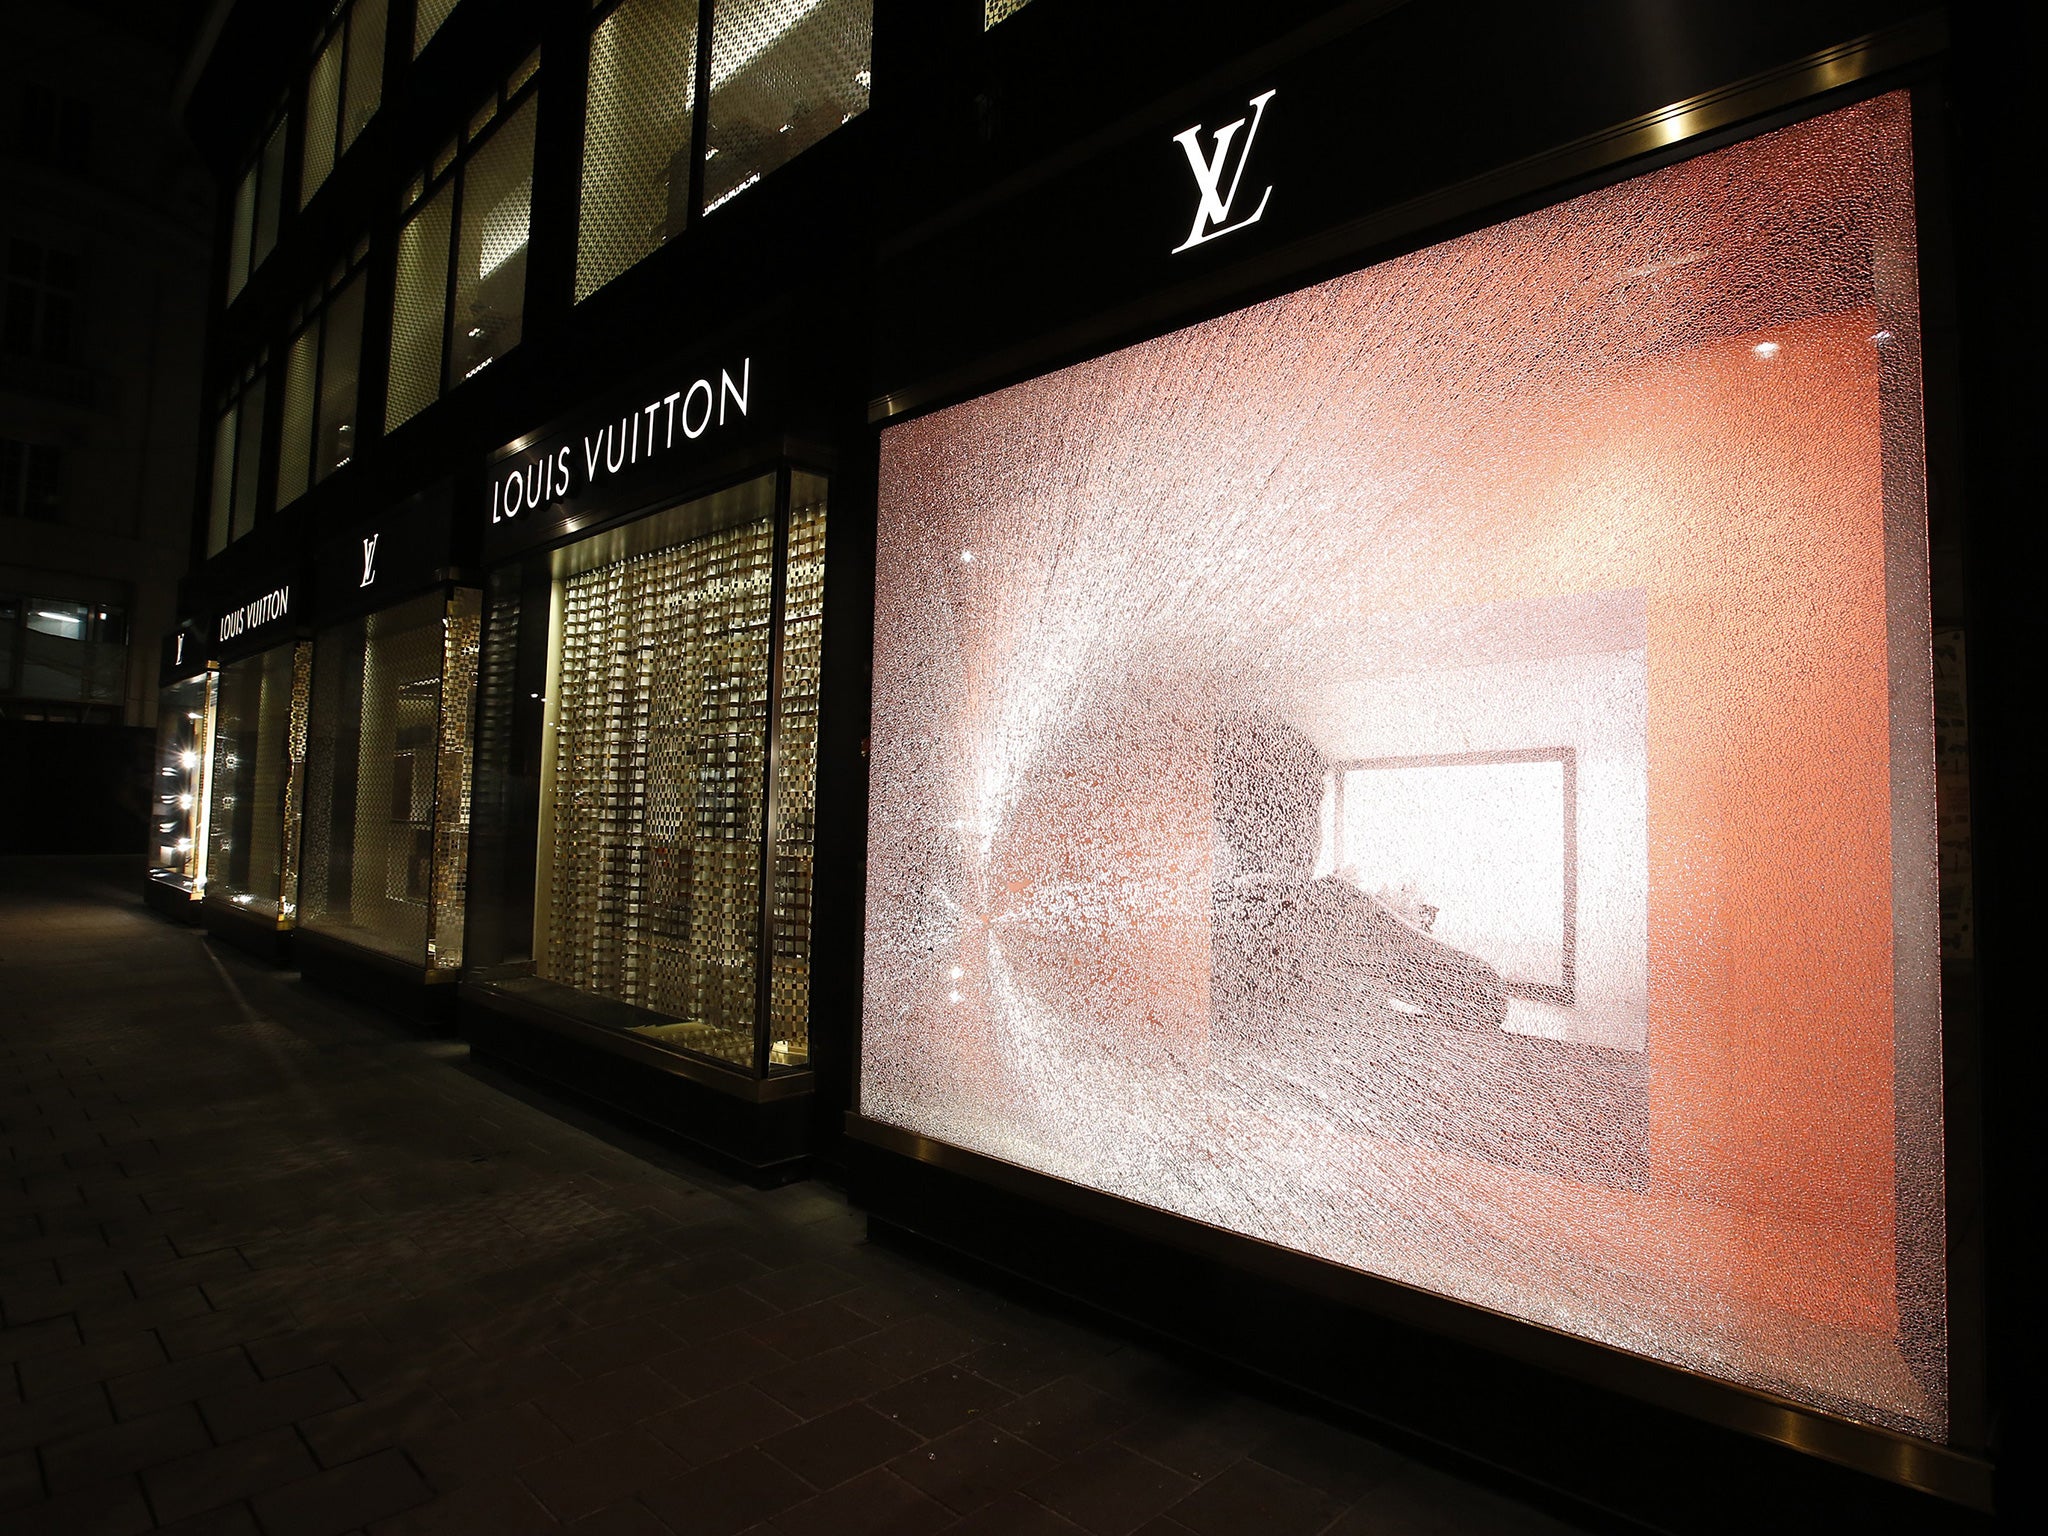 The Louis Vuitton store in Austria had its windows smashed by protesters last year